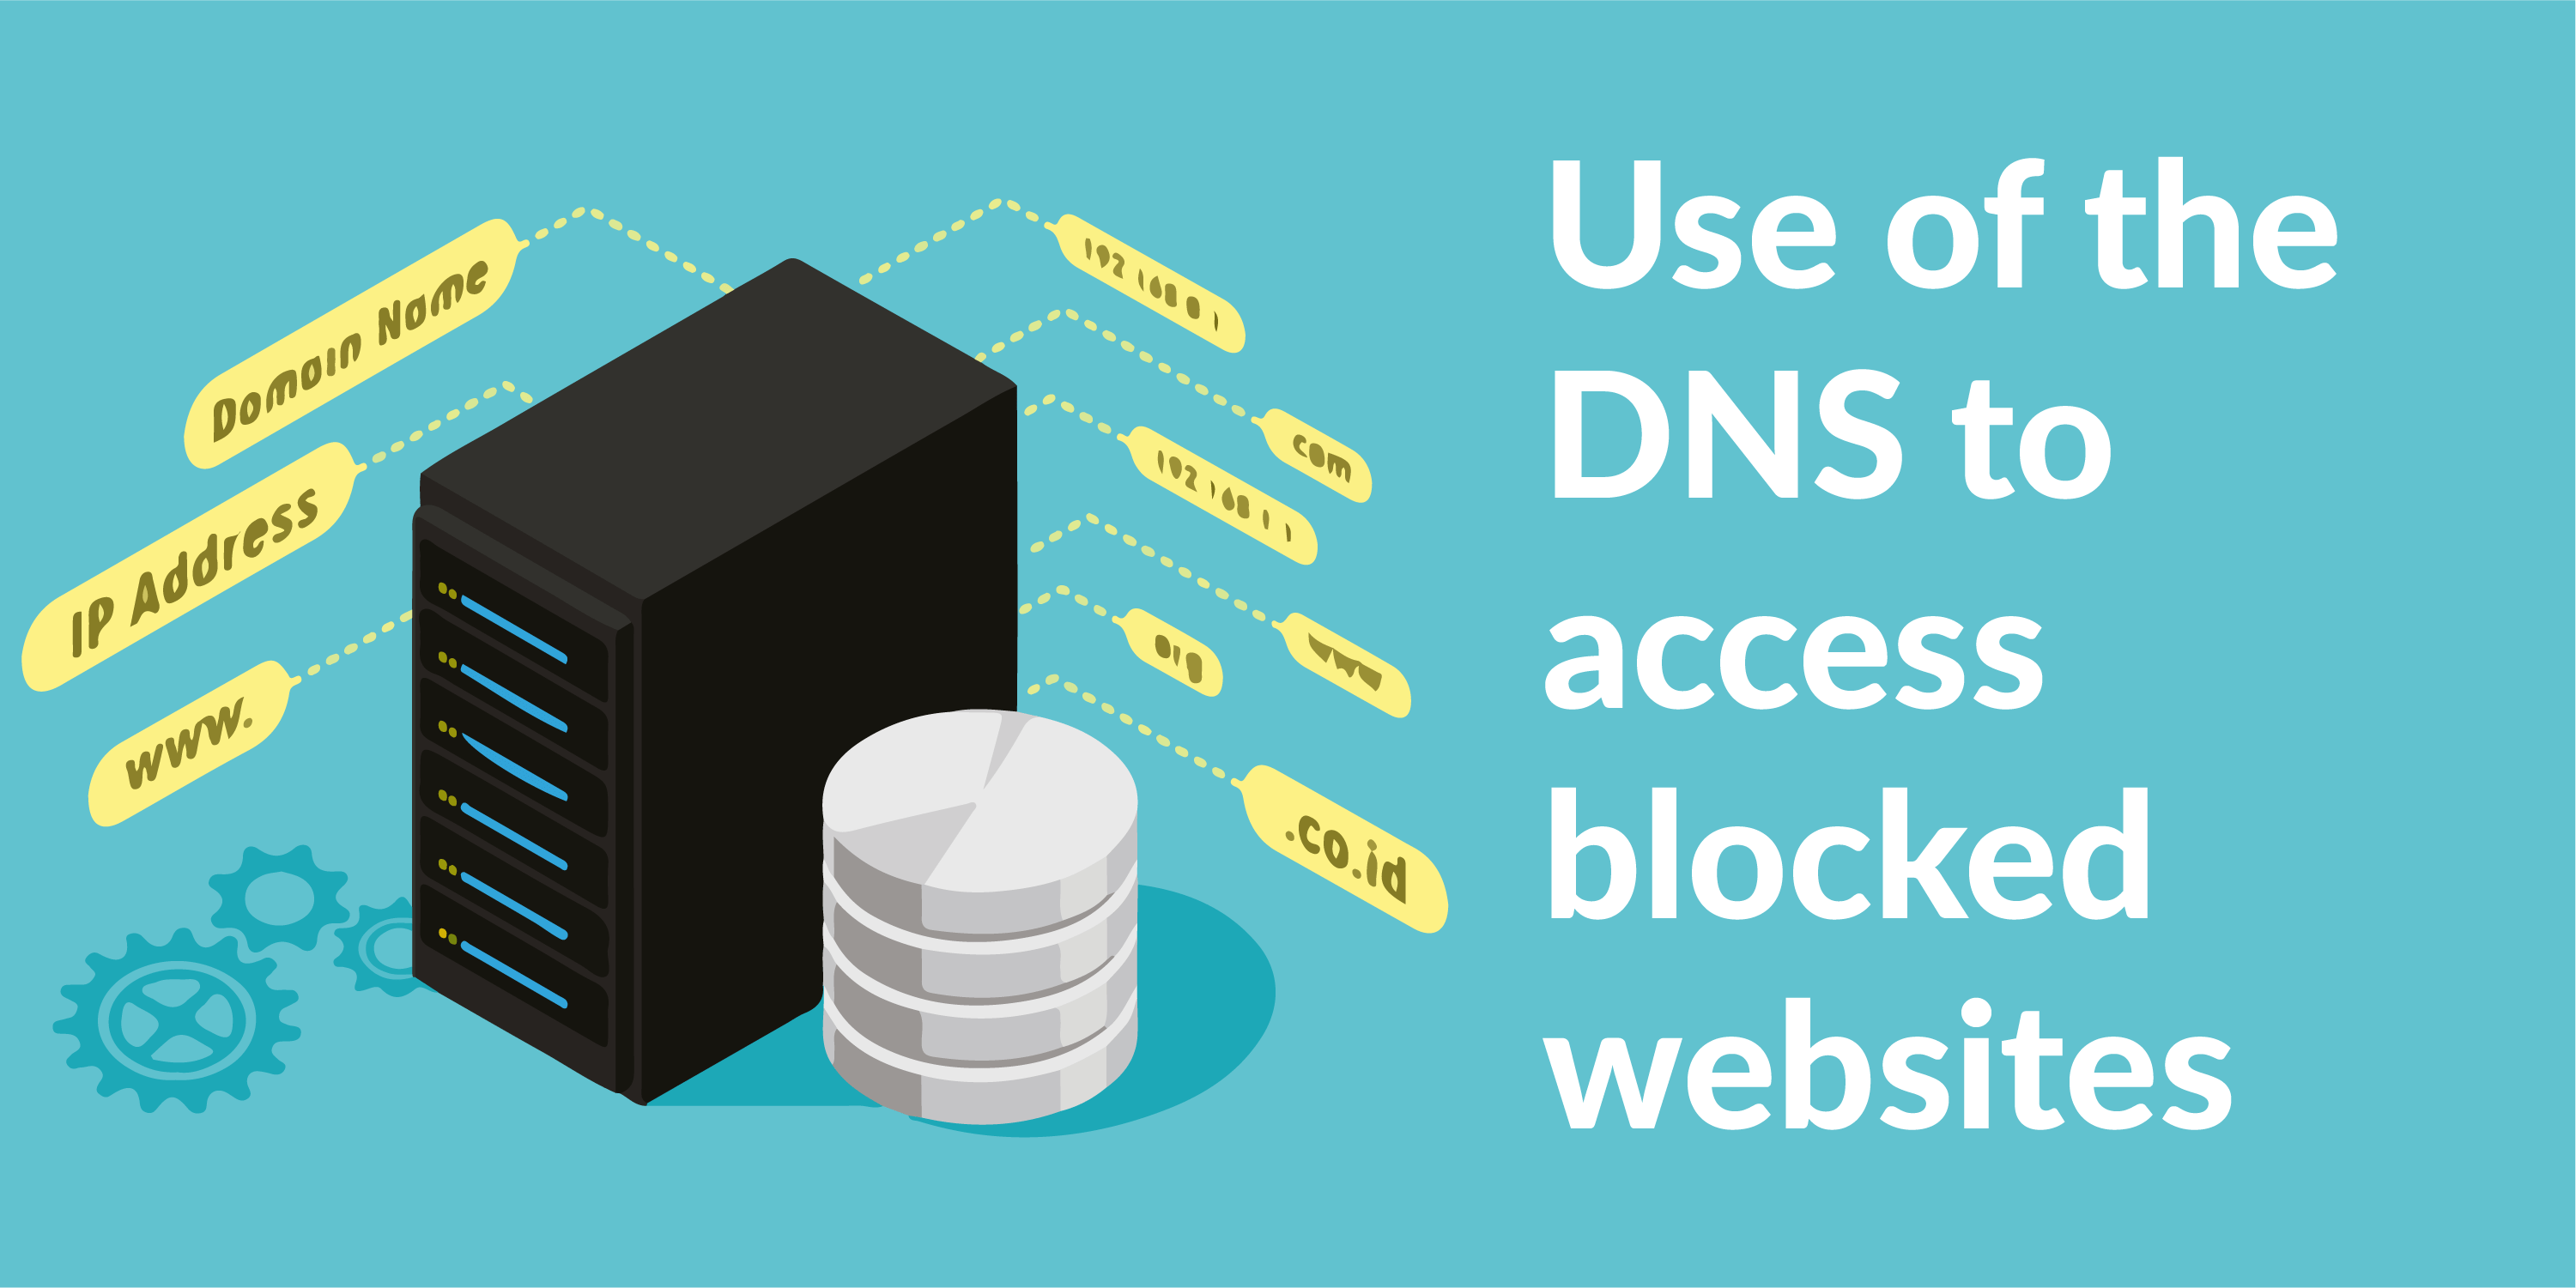 Use DNS to Access the Blocked Websites